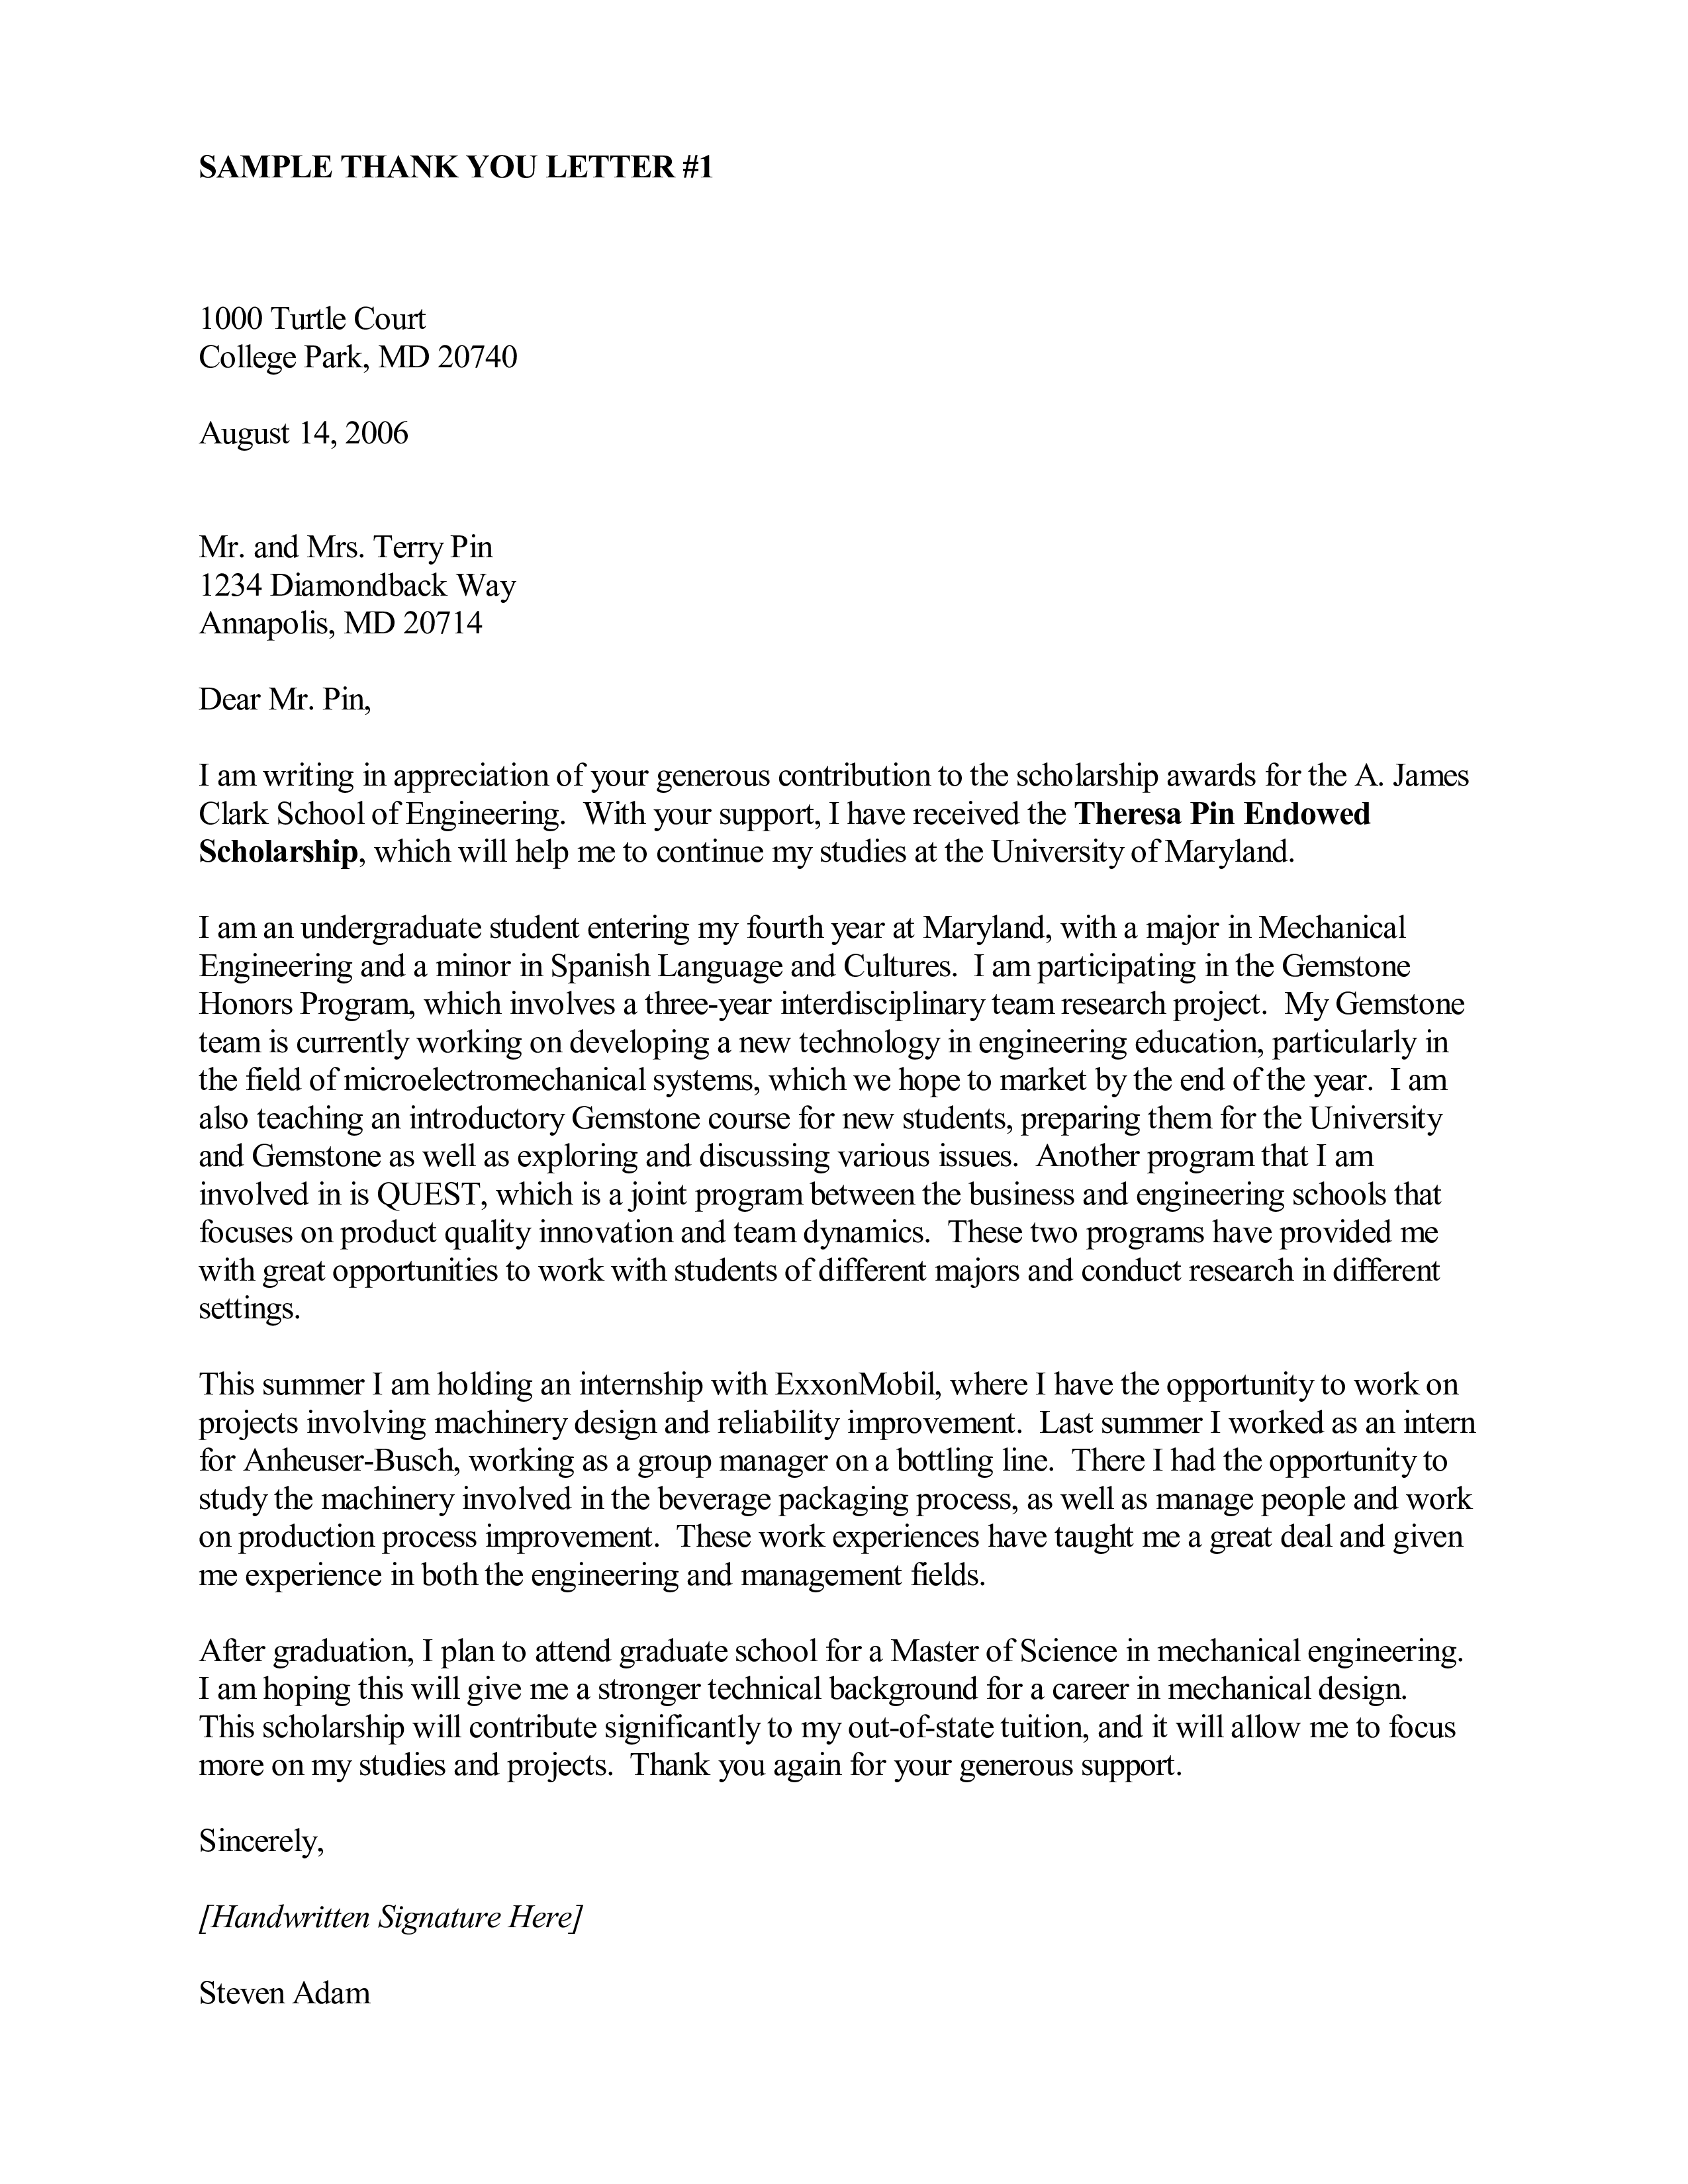 Letter To Scholarship Donor from www.allbusinesstemplates.com